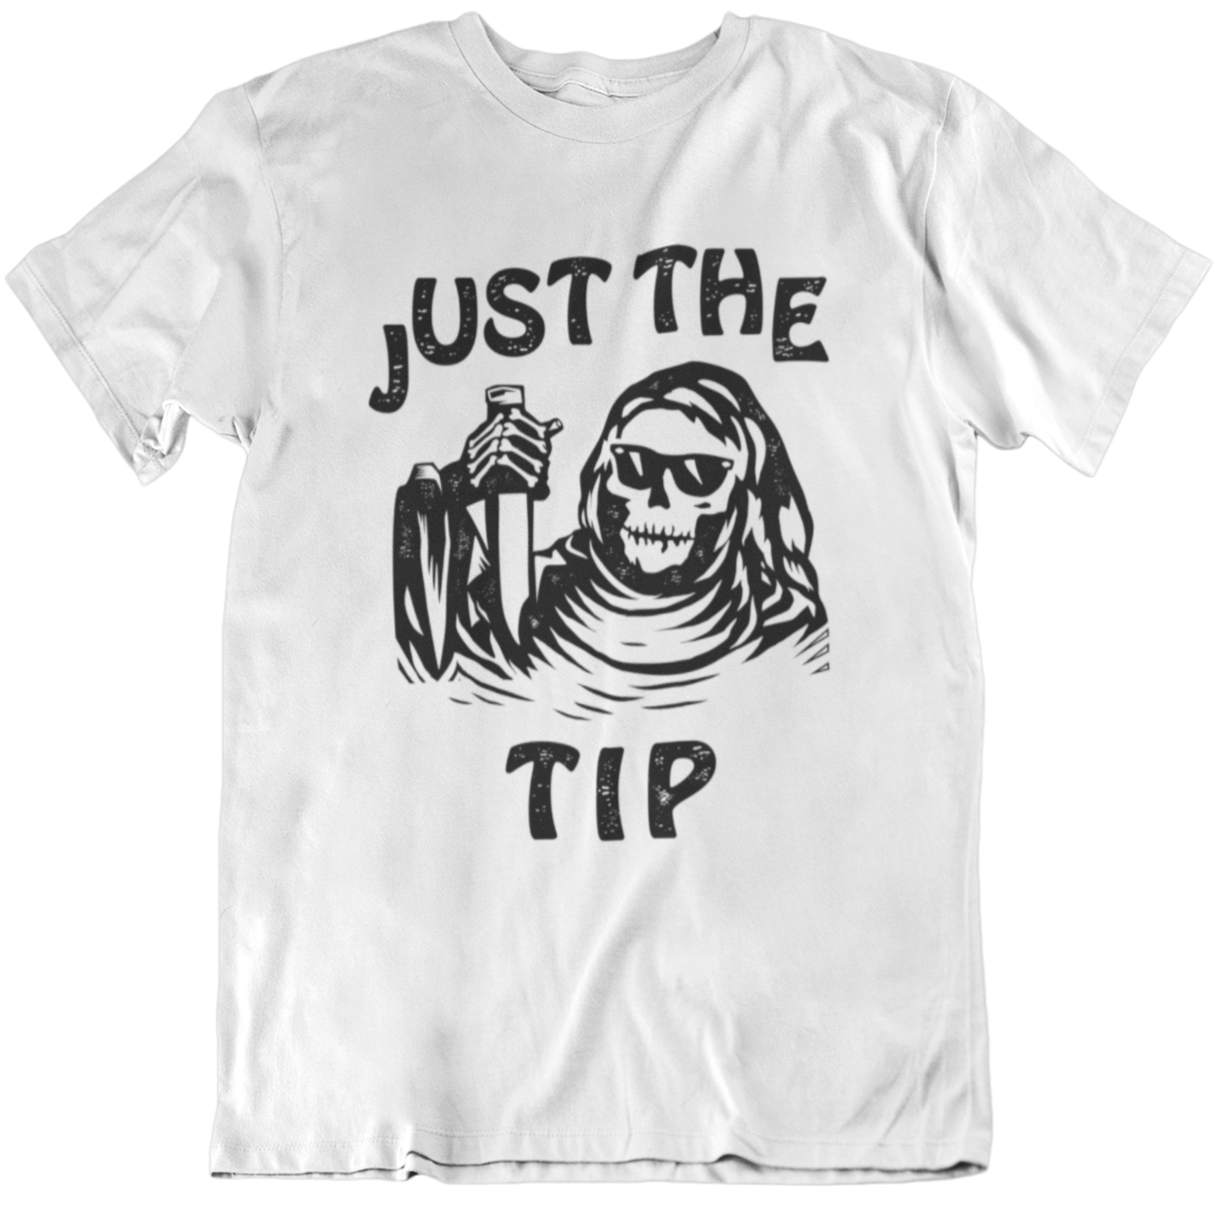 Funny white t-shirt for Latino men. The graphic is a humorous play on words. There is a tattoo-style skeleton holding a knife, and the words surrounding the image state "Just the Tip"